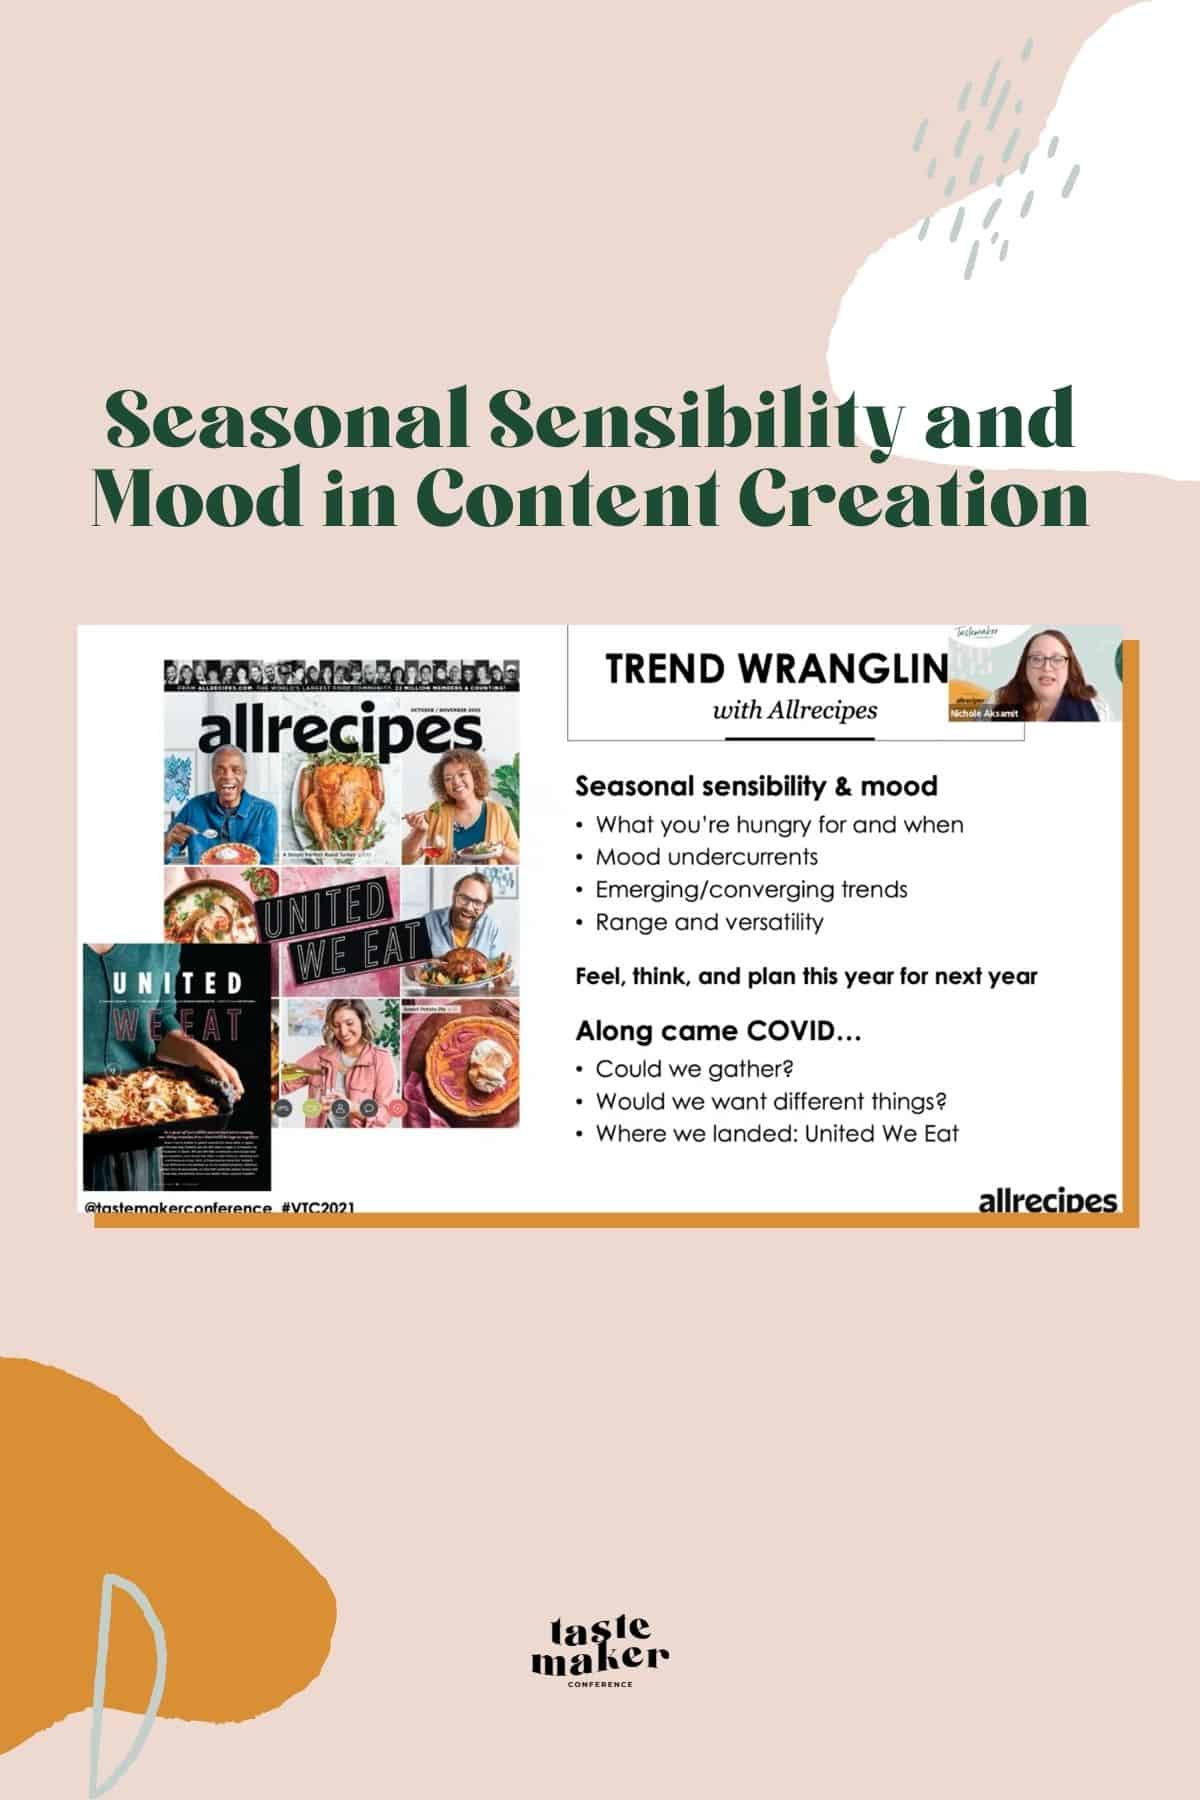 slide with title of section and image from webinar - seasonal sensibility and mood